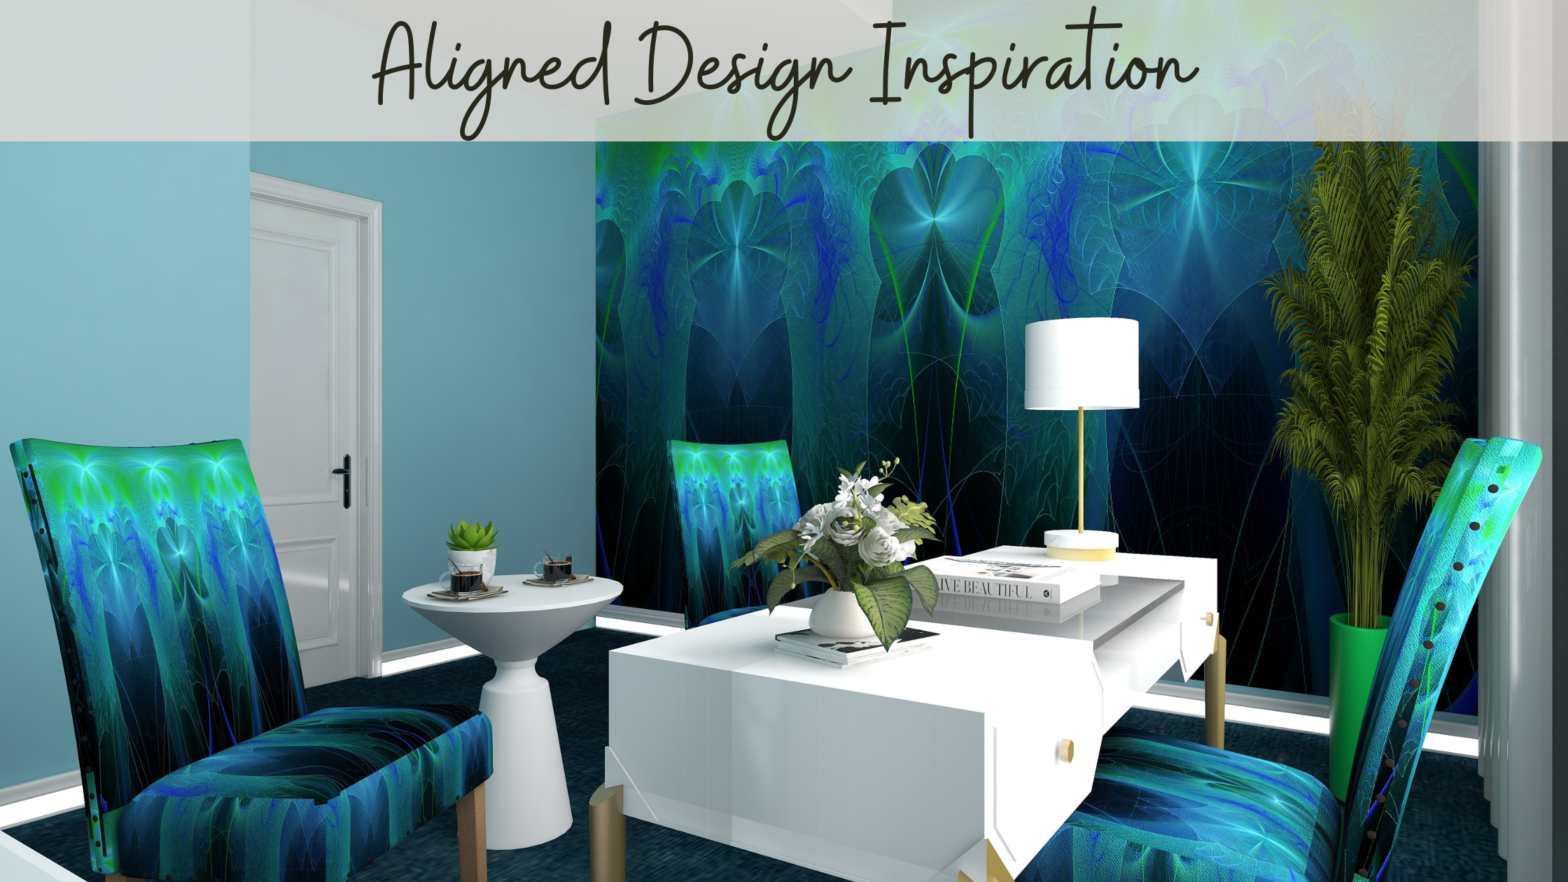 Aligned Design inspiration. A portfolio of work displaying energy art, Interior Design, home staging and vacation rental design by Mary Ann Benoit of Northern Lights Home Staging and Design.